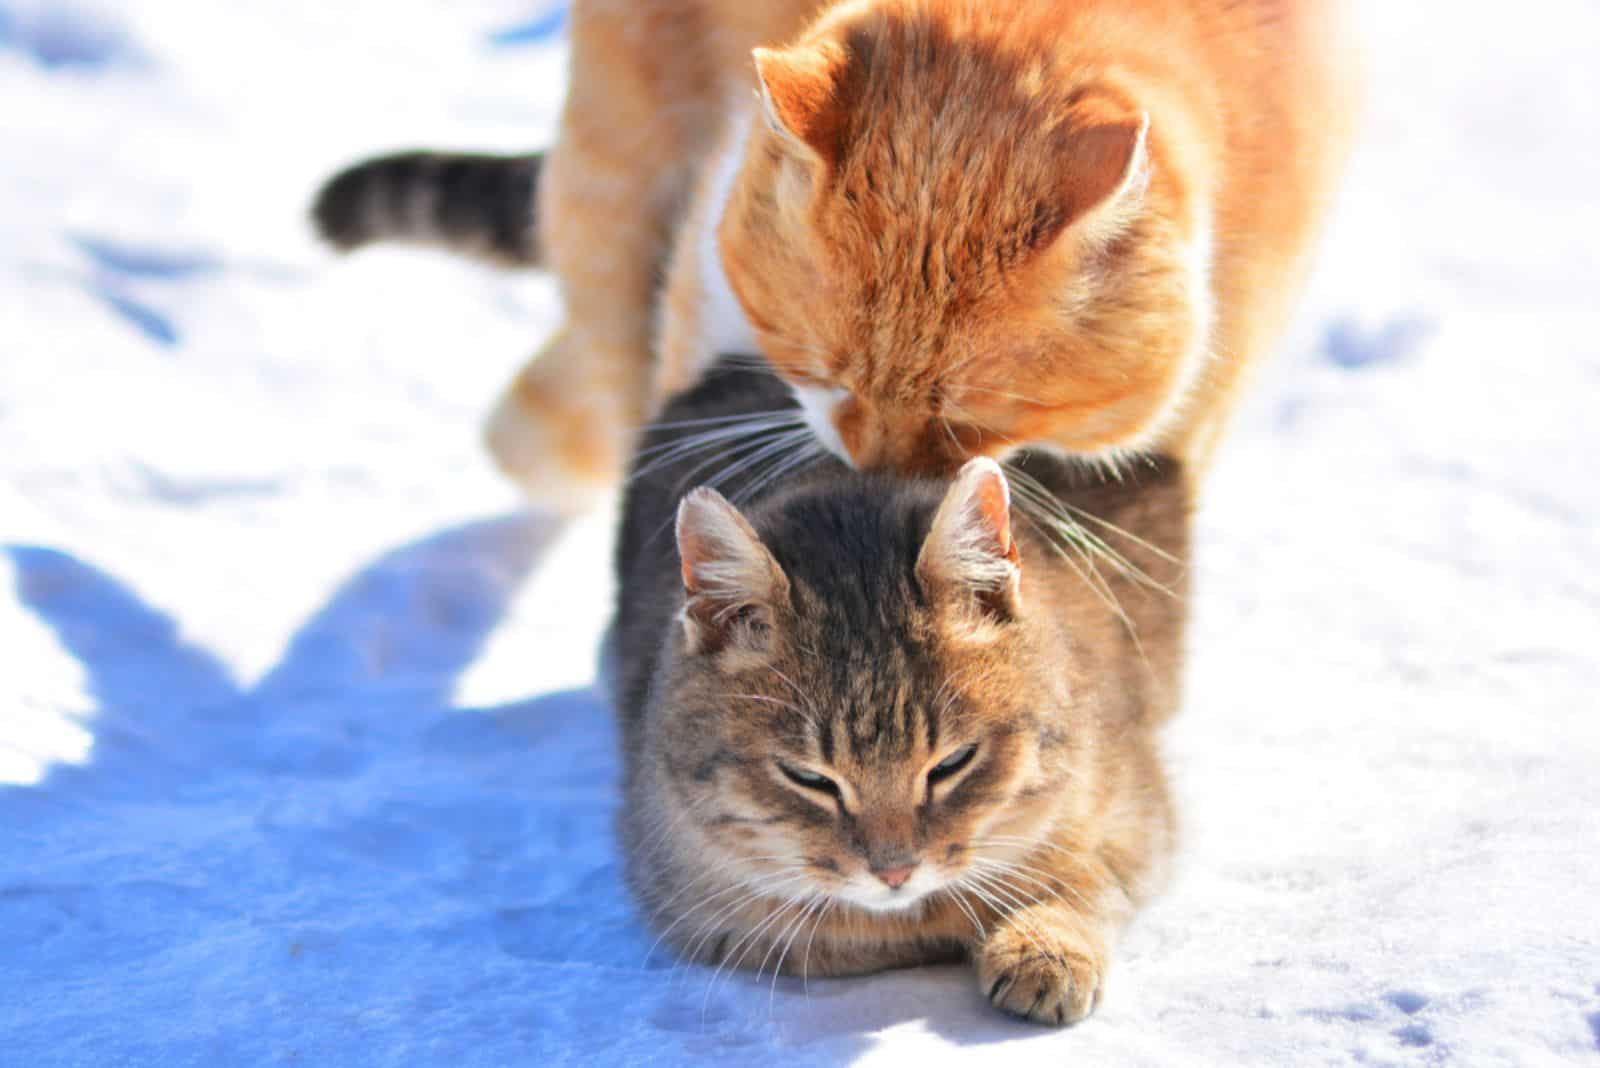 Street cats make love in the snow